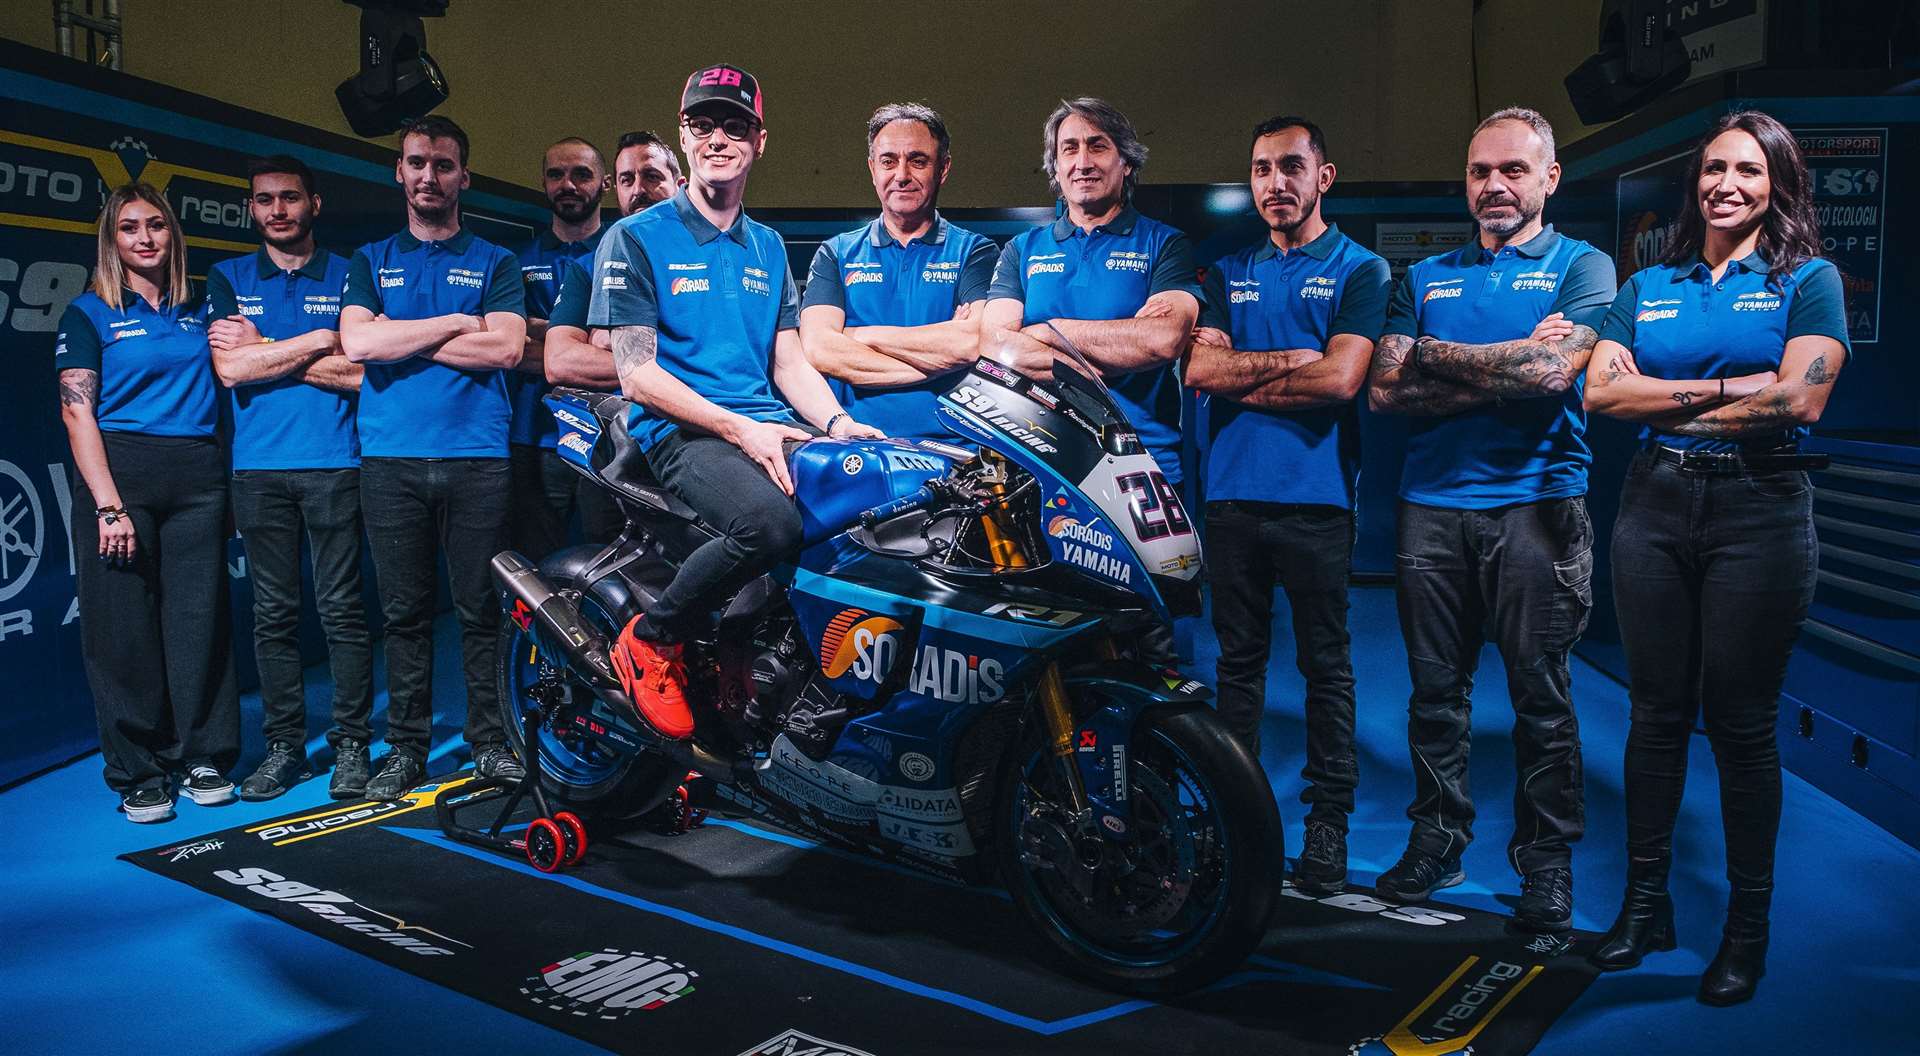 Lydd's Bradley Ray and his team at the launch of this year’s bike for their Superbike World Championship campaign. Picture: Giulio di Natale